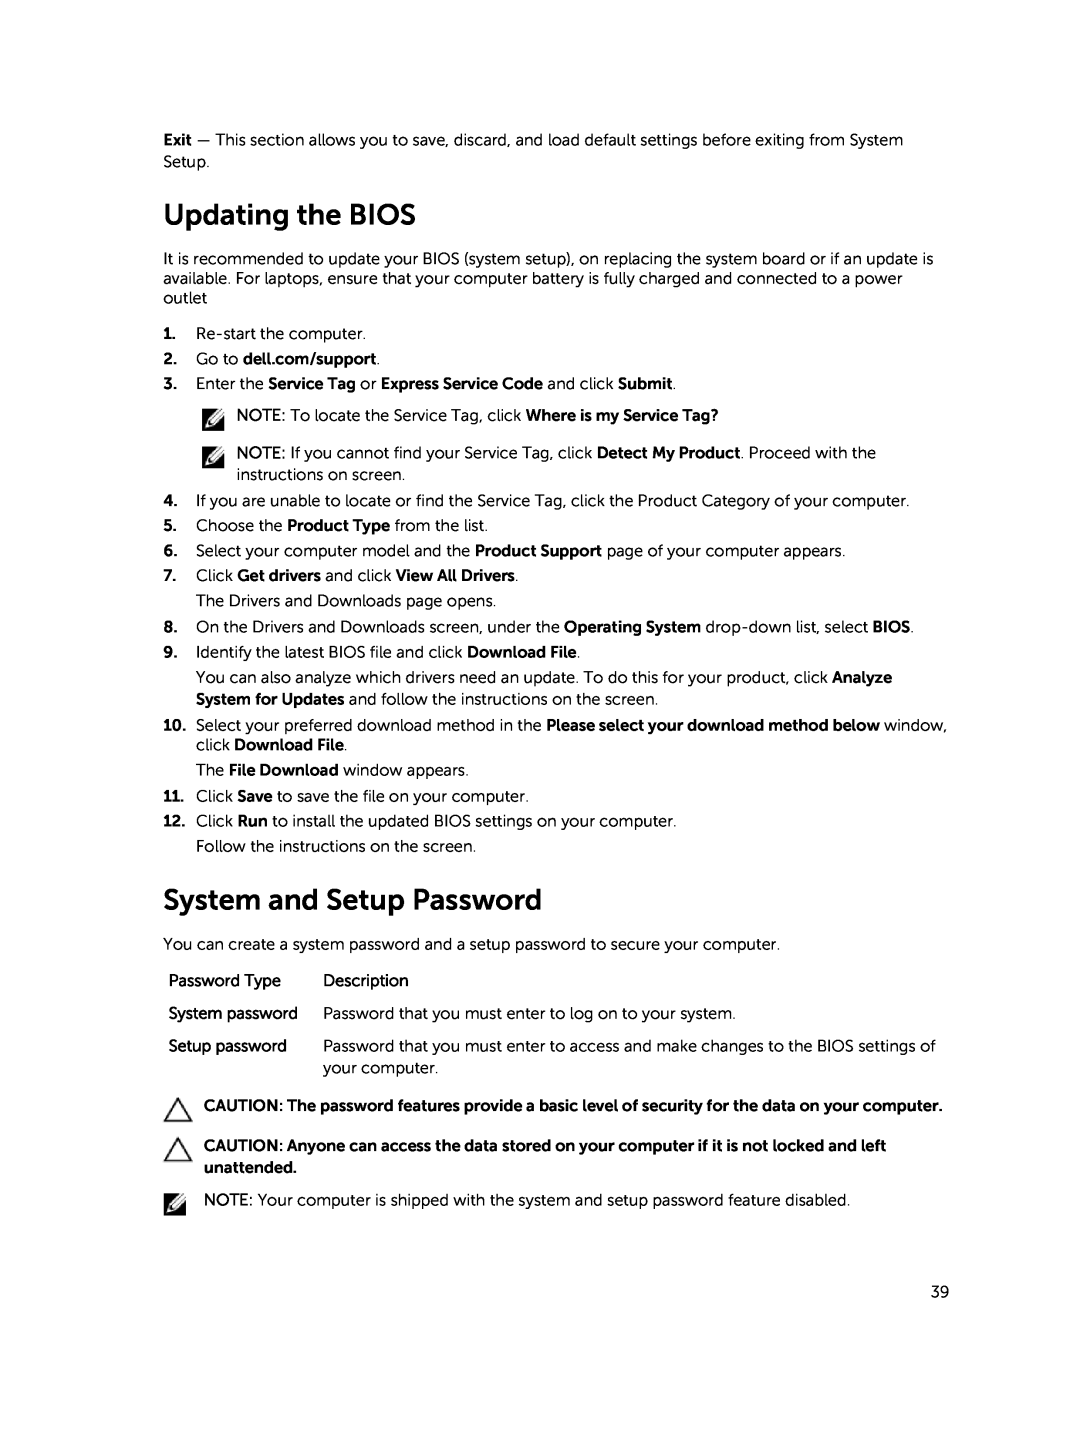 Dell 15  - 3549 owner manual Updating the BIOS, System and Setup Password, Password Type 